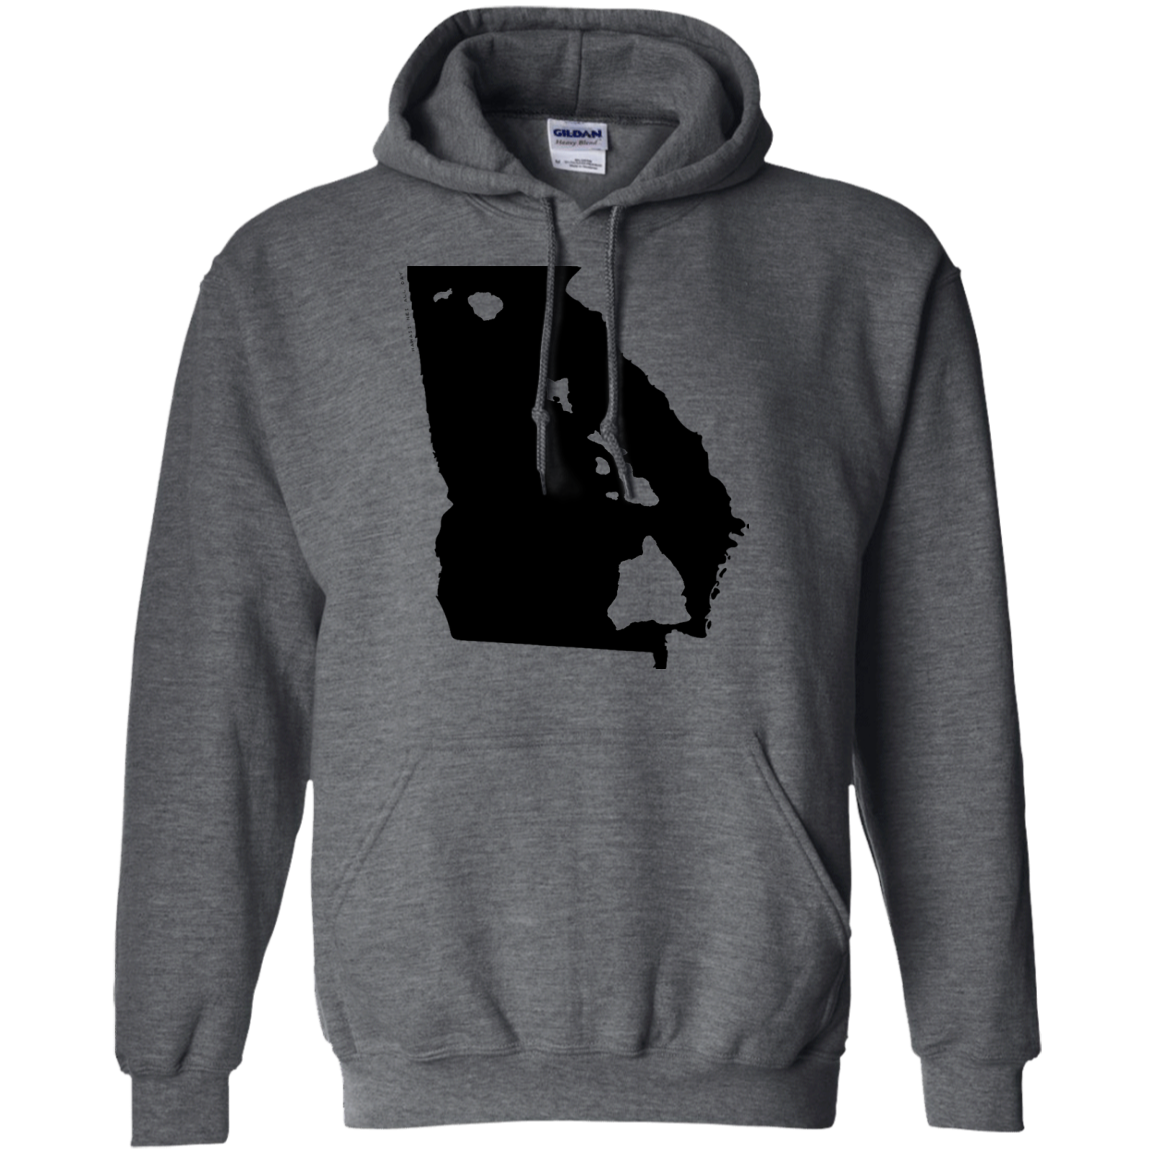 Living in Georgia with Hawaii Roots Pullover Hoodie, Sweatshirts, Hawaii Nei All Day